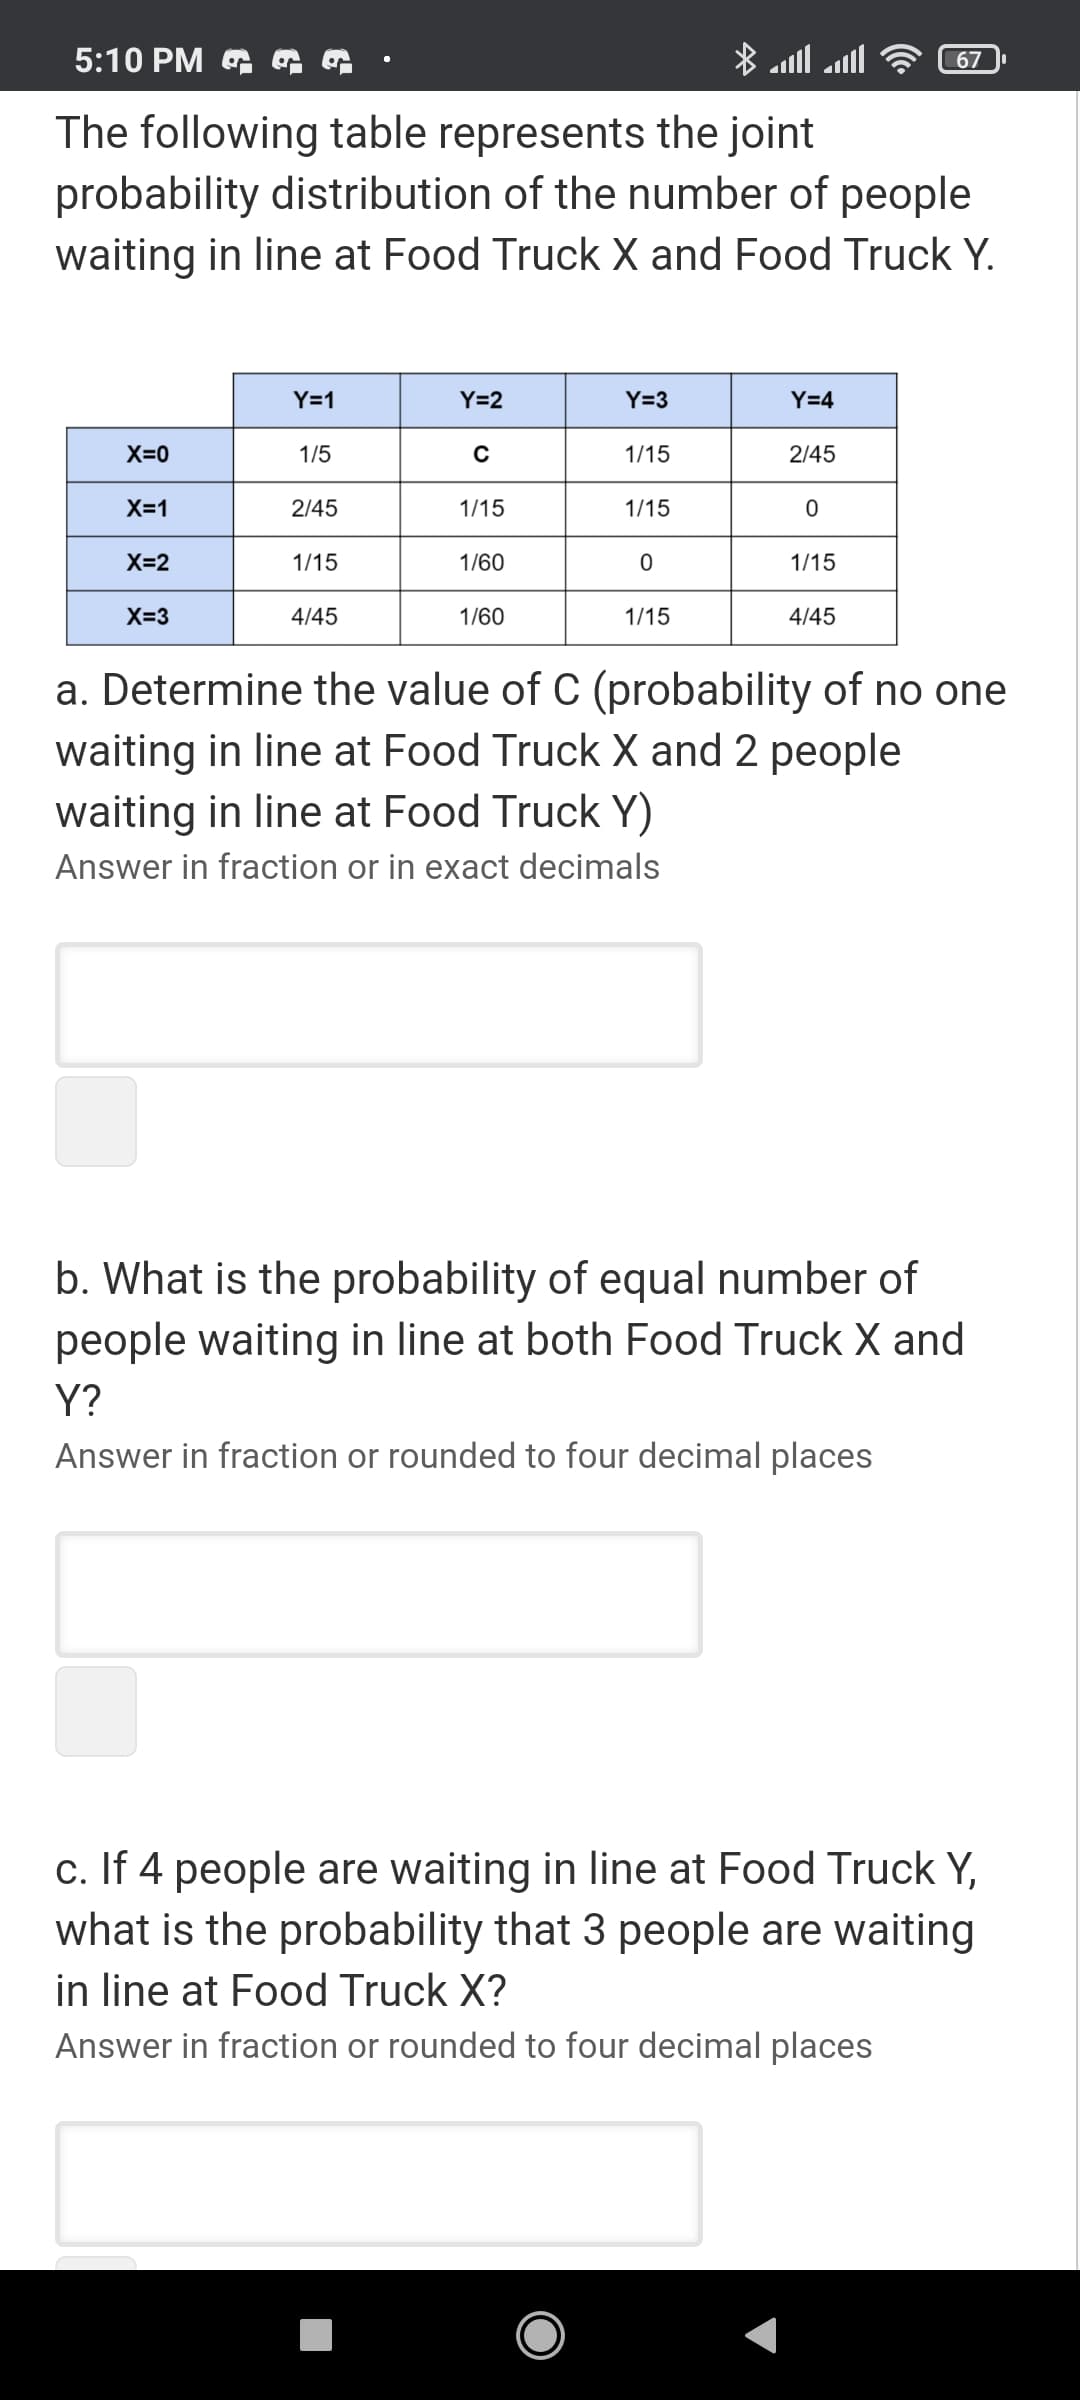 5:10 PM G G
67 .
The following table represents the joint
probability distribution of the number of people
waiting in line at Food Truck X and Food Truck Y.
Y=1
Y=2
Y=3
Y=4
X=0
1/5
1/15
2/45
X=1
2/45
1/15
1/15
X=2
1/15
1/60
1/15
X=3
4/45
1/60
1/15
4/45
a. Determine the value of C (probability of no one
waiting in line at Food Truck X and 2 people
waiting in line at Food Truck Y)
Answer in fraction or in exact decimals
b. What is the probability of equal number of
people waiting in line at both Food Truck X and
Y?
Answer in fraction or rounded to four decimal places
c. If 4 people are waiting in line at Food Truck Y,
what is the probability that 3 people are waiting
in line at Food Truck X?
Answer in fraction or rounded to four decimal places
